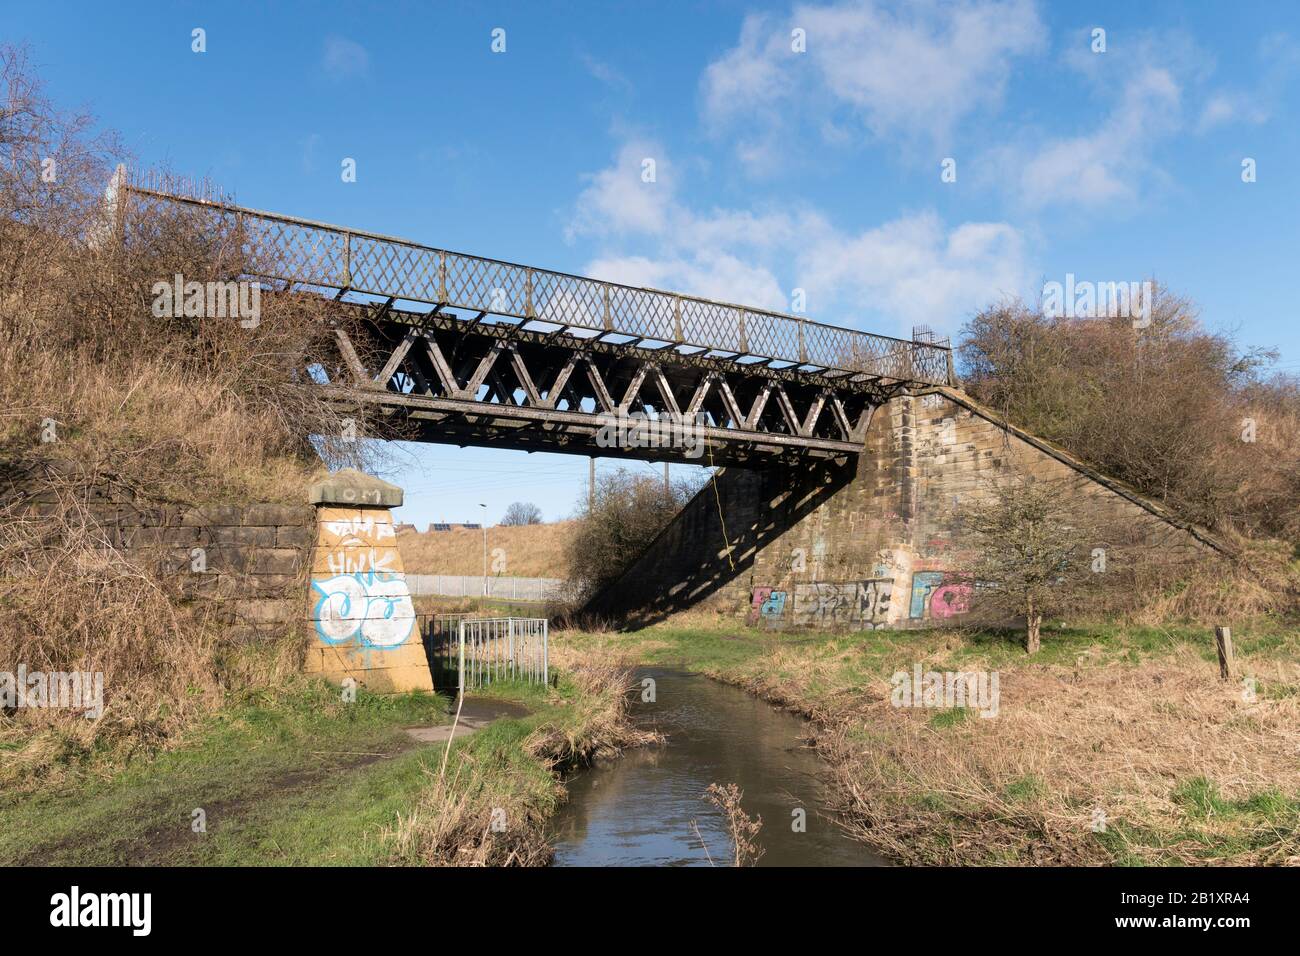 Old disused Stanhope and Tyne railway bridge over the river Don in Boldon Colliery, Tyne and Wear, England, UK Stock Photo